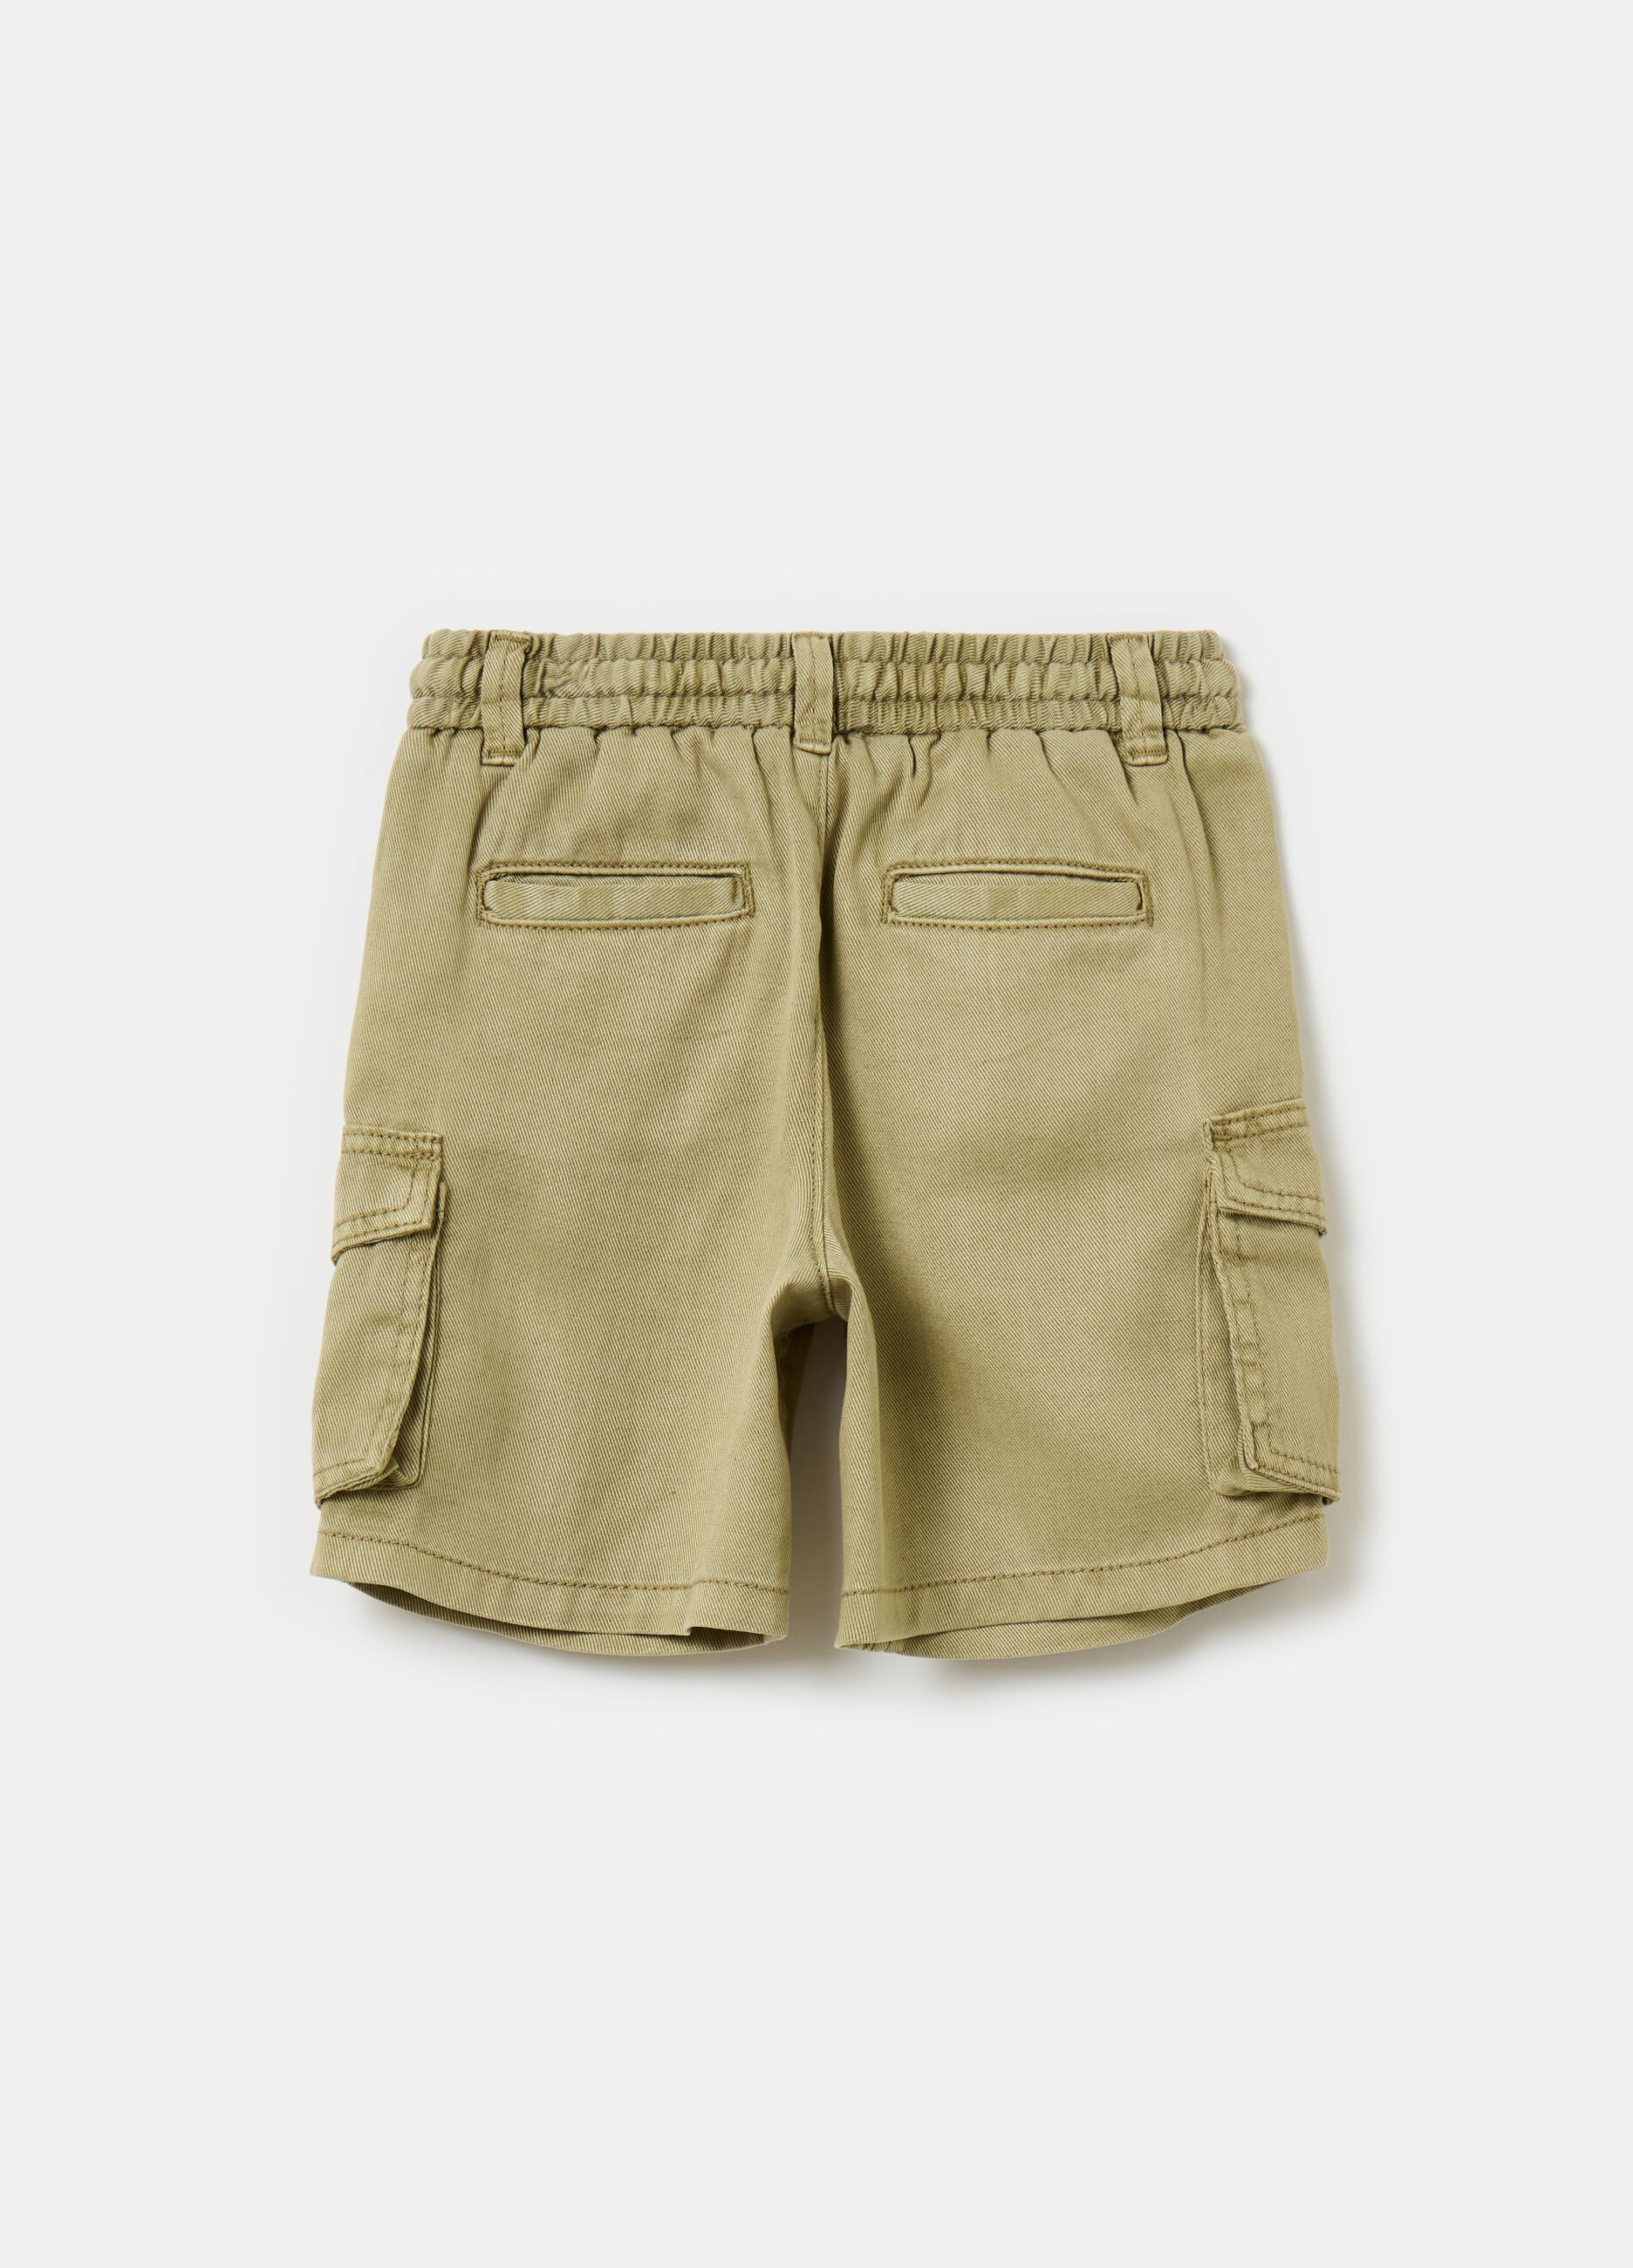 Lyocell linen and cotton shorts